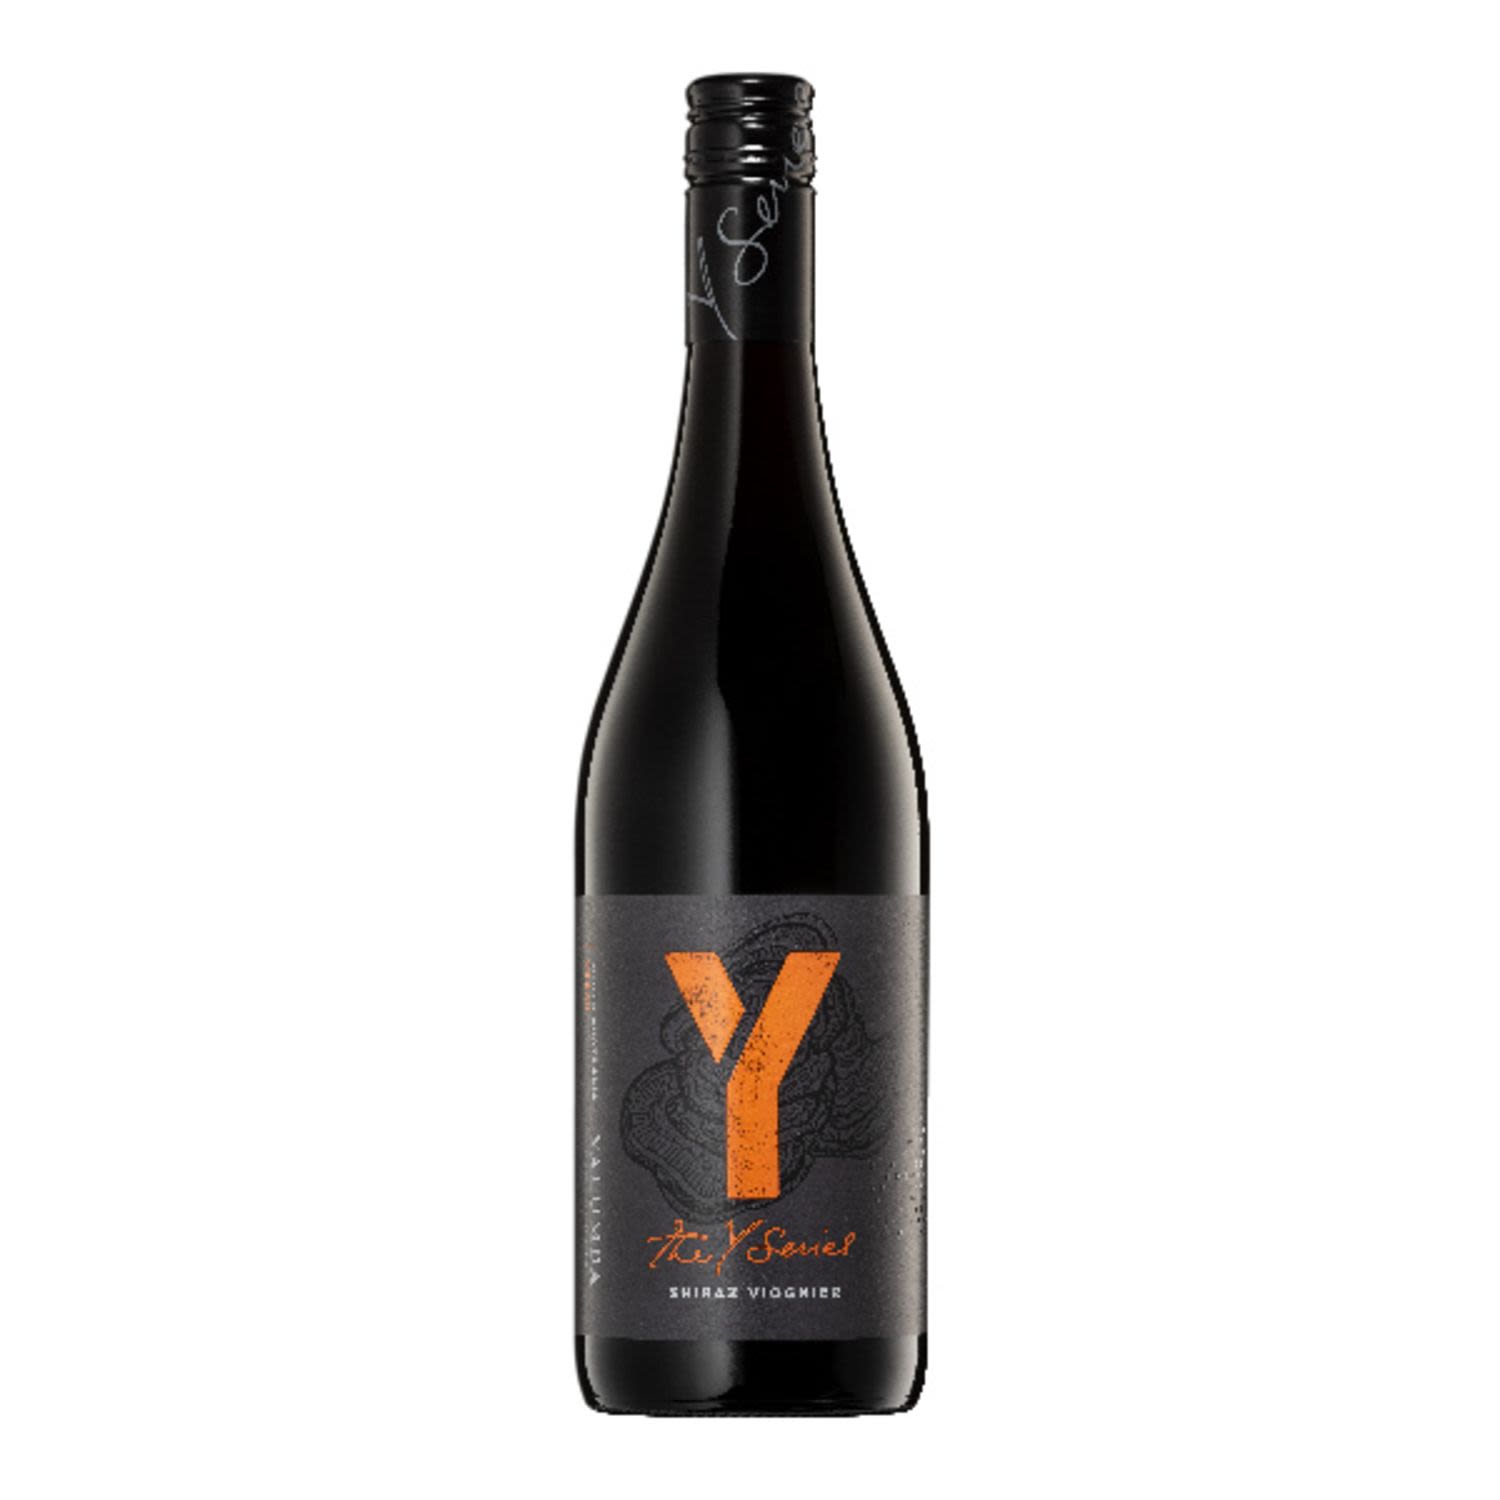 The Shiraz Viognier depicts the horse, a symbol of our past when they were the transport and tractor of Yalumba. Nowadays, we enjoy a day at the races watching magnificent thoroughbreds cross the finish line carrying our colours and money!<br /> <br />Alcohol Volume: 13.50%<br /><br />Pack Format: Bottle<br /><br />Standard Drinks: 8<br /><br />Pack Type: Bottle<br /><br />Country of Origin: Australia<br /><br />Region: South Australia<br /><br />Vintage: Vintages Vary<br />